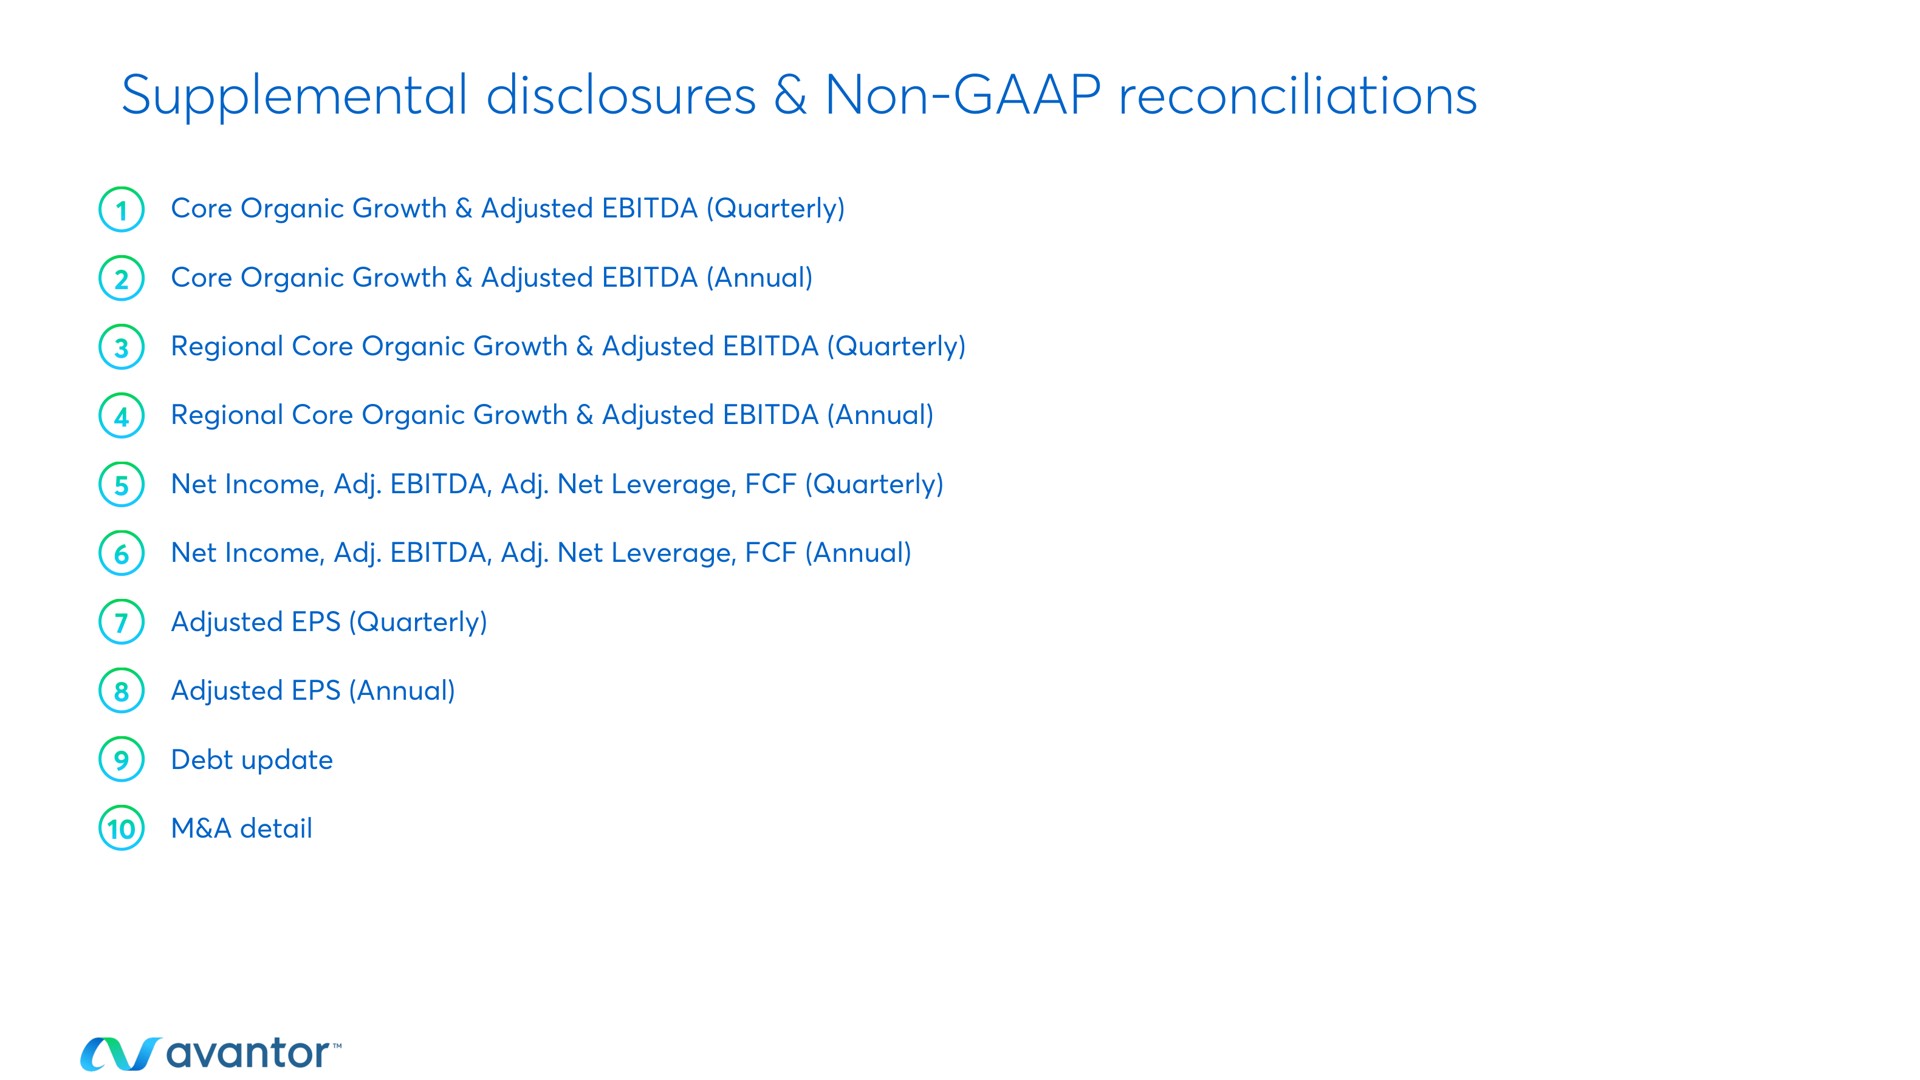 supplemental disclosures non reconciliations core organic growth adjusted quarterly core organic growth adjusted annual regional core organic growth adjusted quarterly regional core organic growth adjusted annual net income net leverage quarterly net income net leverage annual adjusted quarterly adjusted annual debt update a detail | Avantor